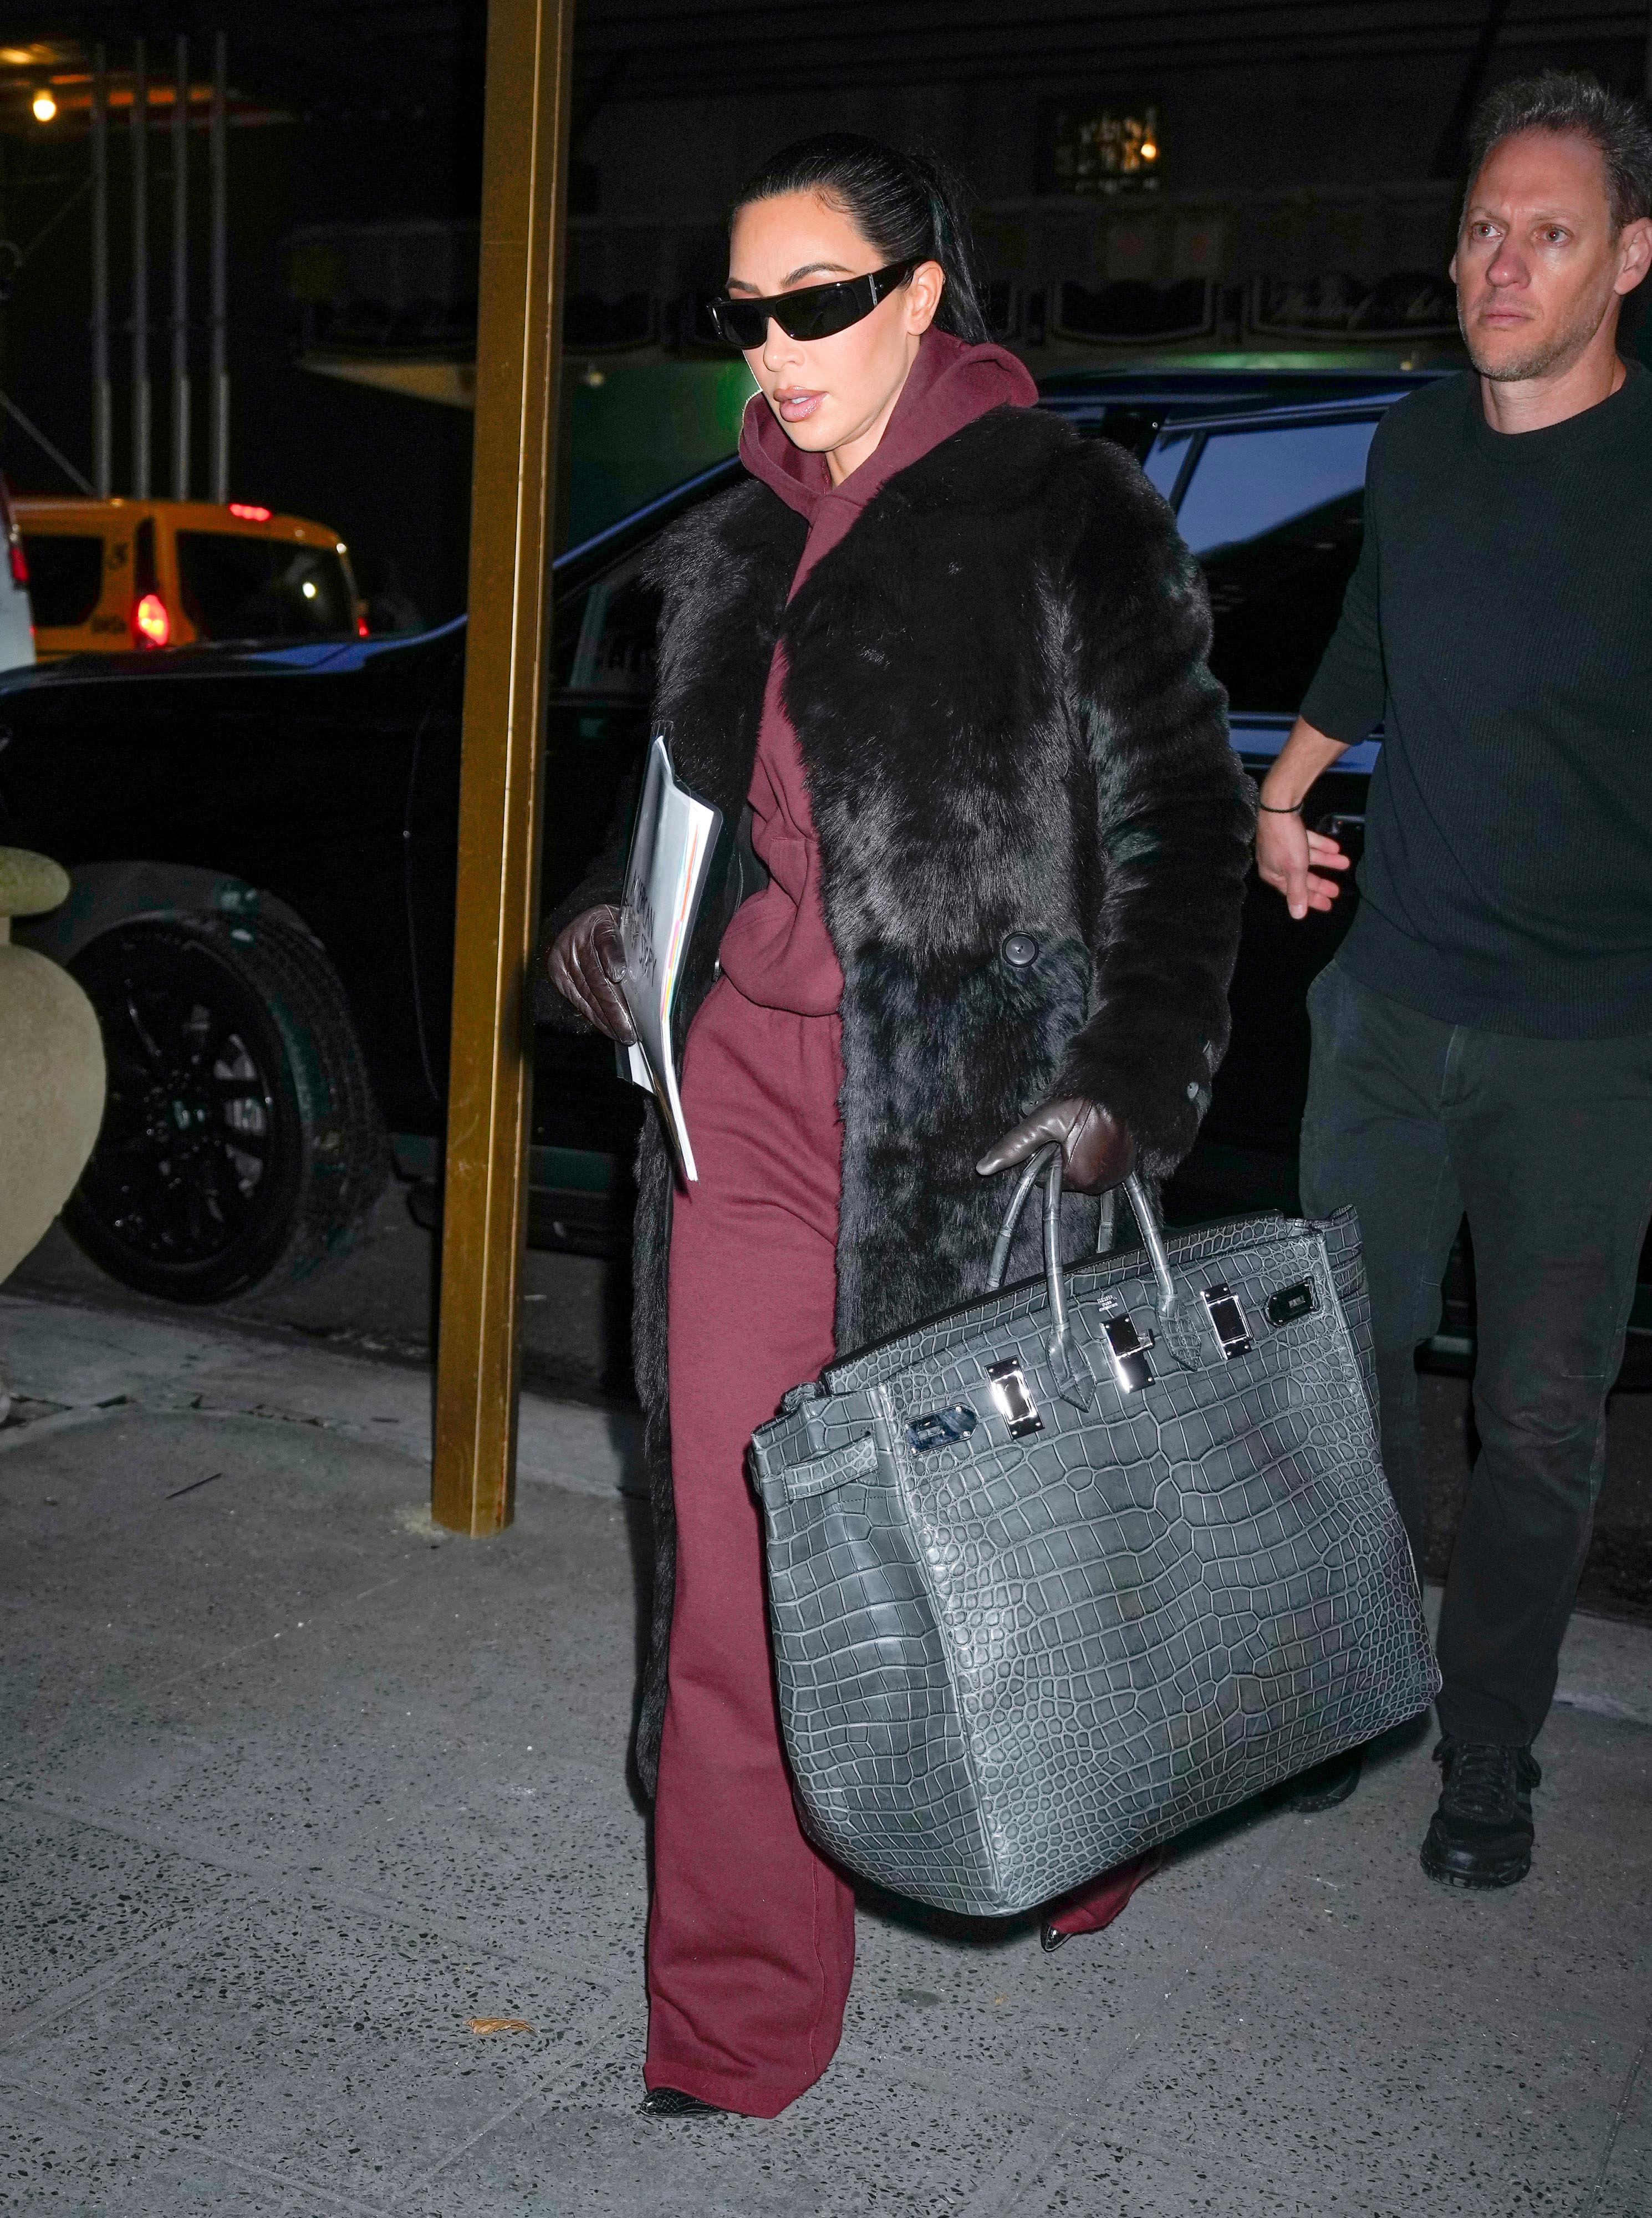 Kim was first to wear the sweatsuit, fur coat, and super-expensive Hermés Birkin bag